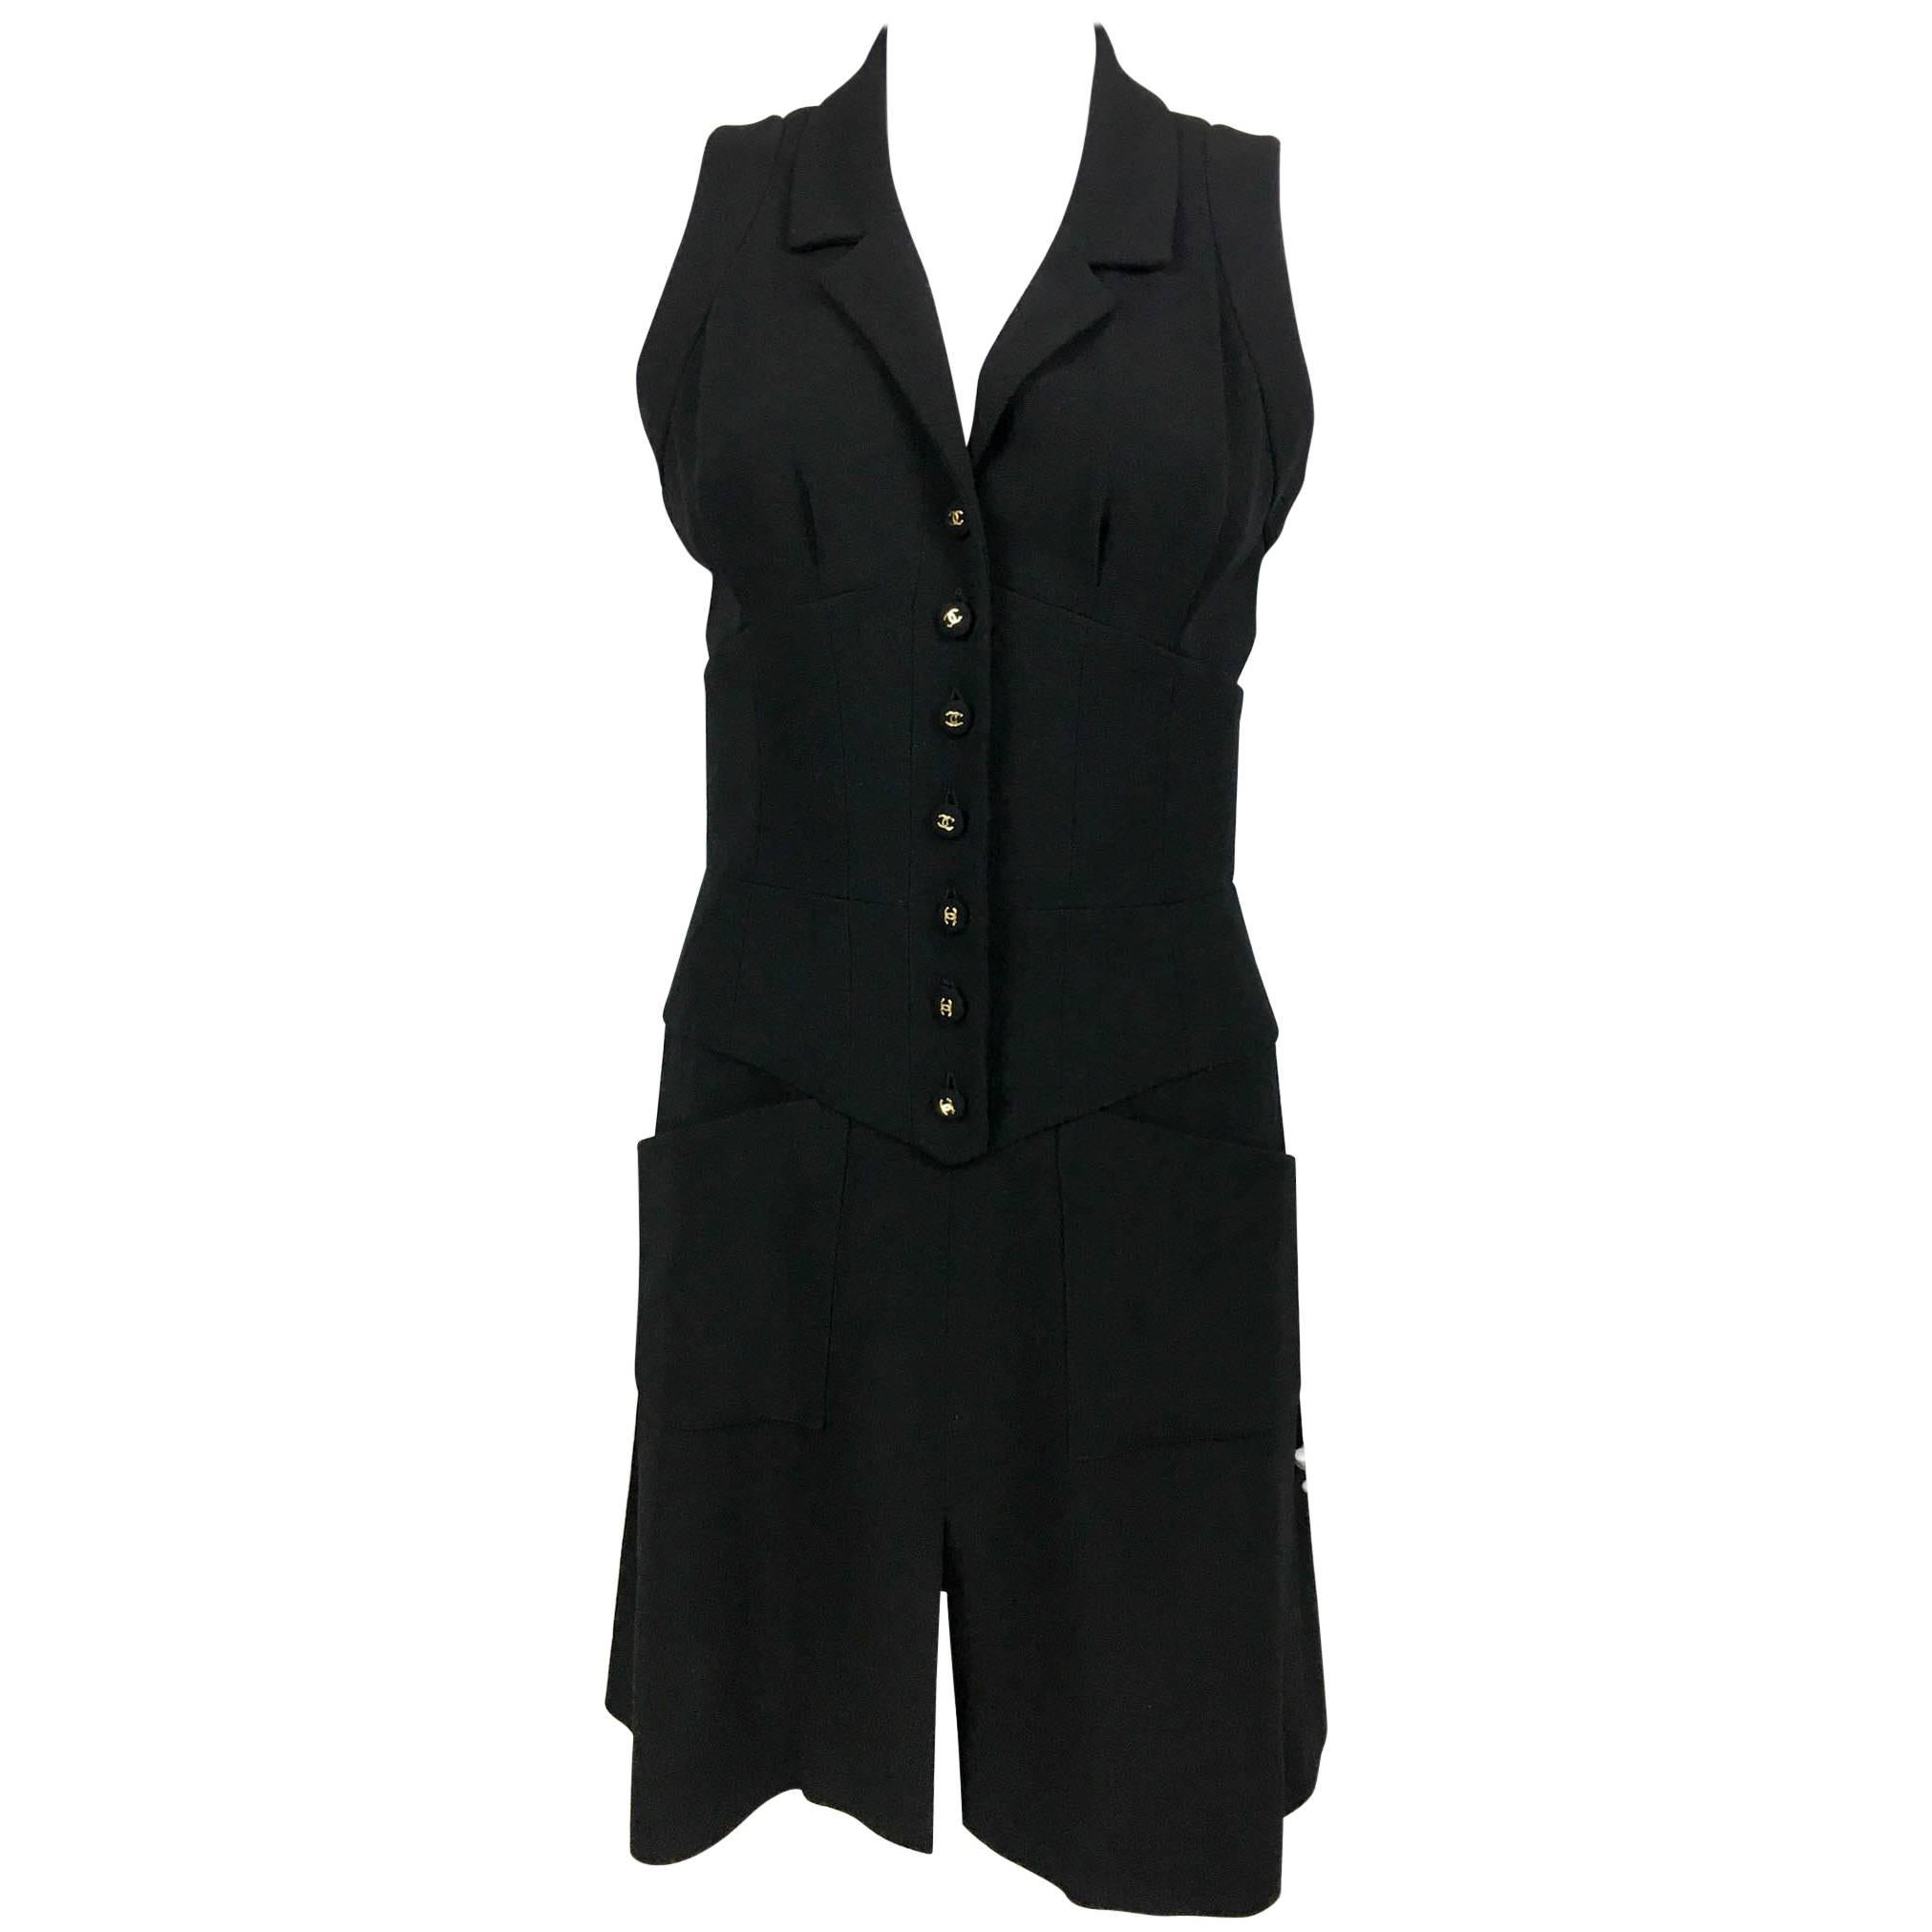 Chanel Black Waistcoat-Style Wool Dress With Logo Buttons - 1990s